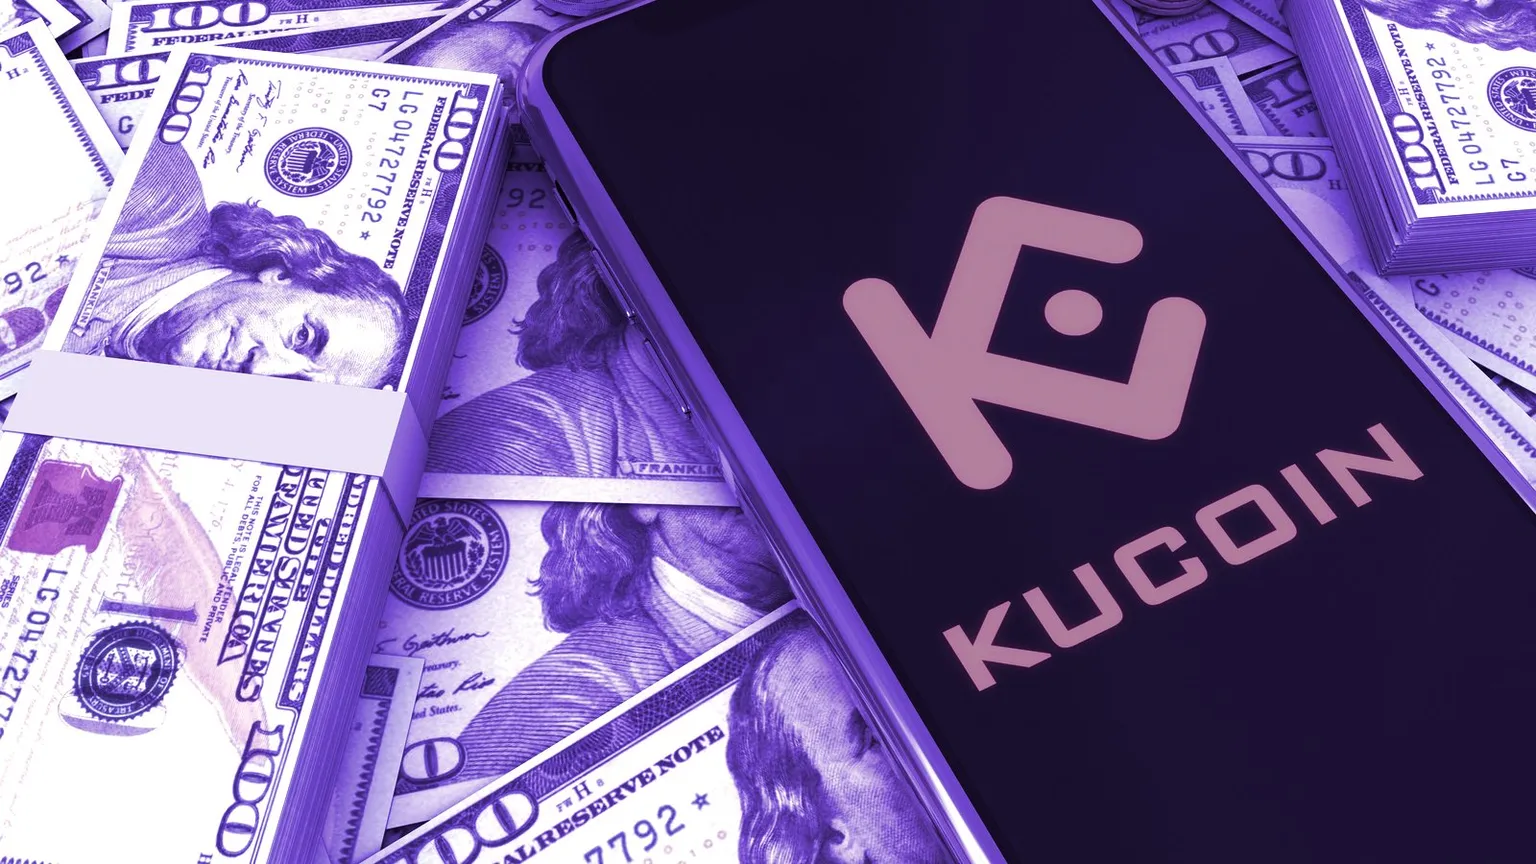 KuCoin is a cryptocurrency exchange. Image: Shutterstock